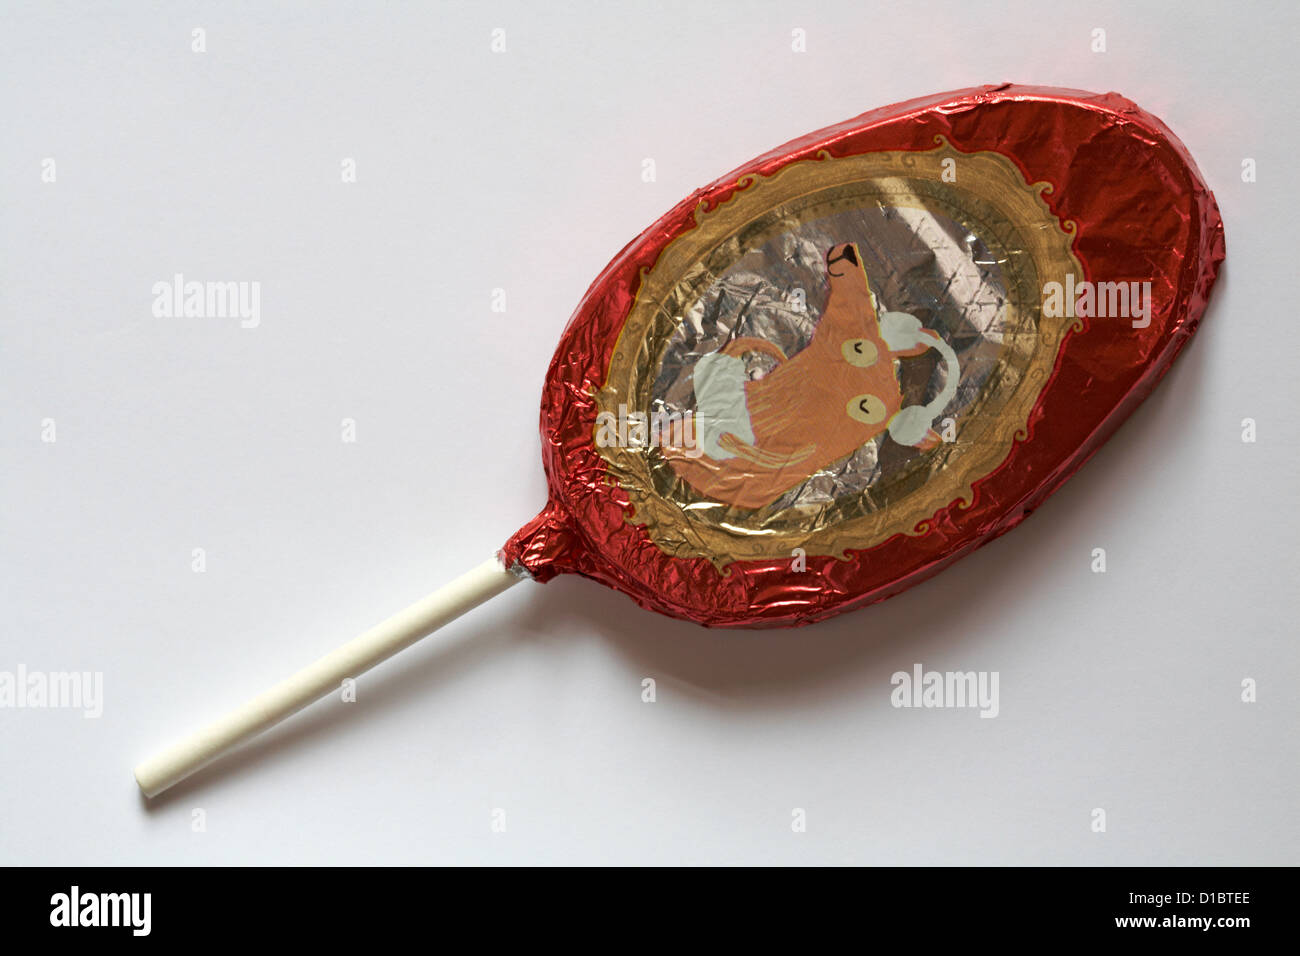 Christmas foil wrapped chocolate lolly ready for Christmas isolated on white background Stock Photo